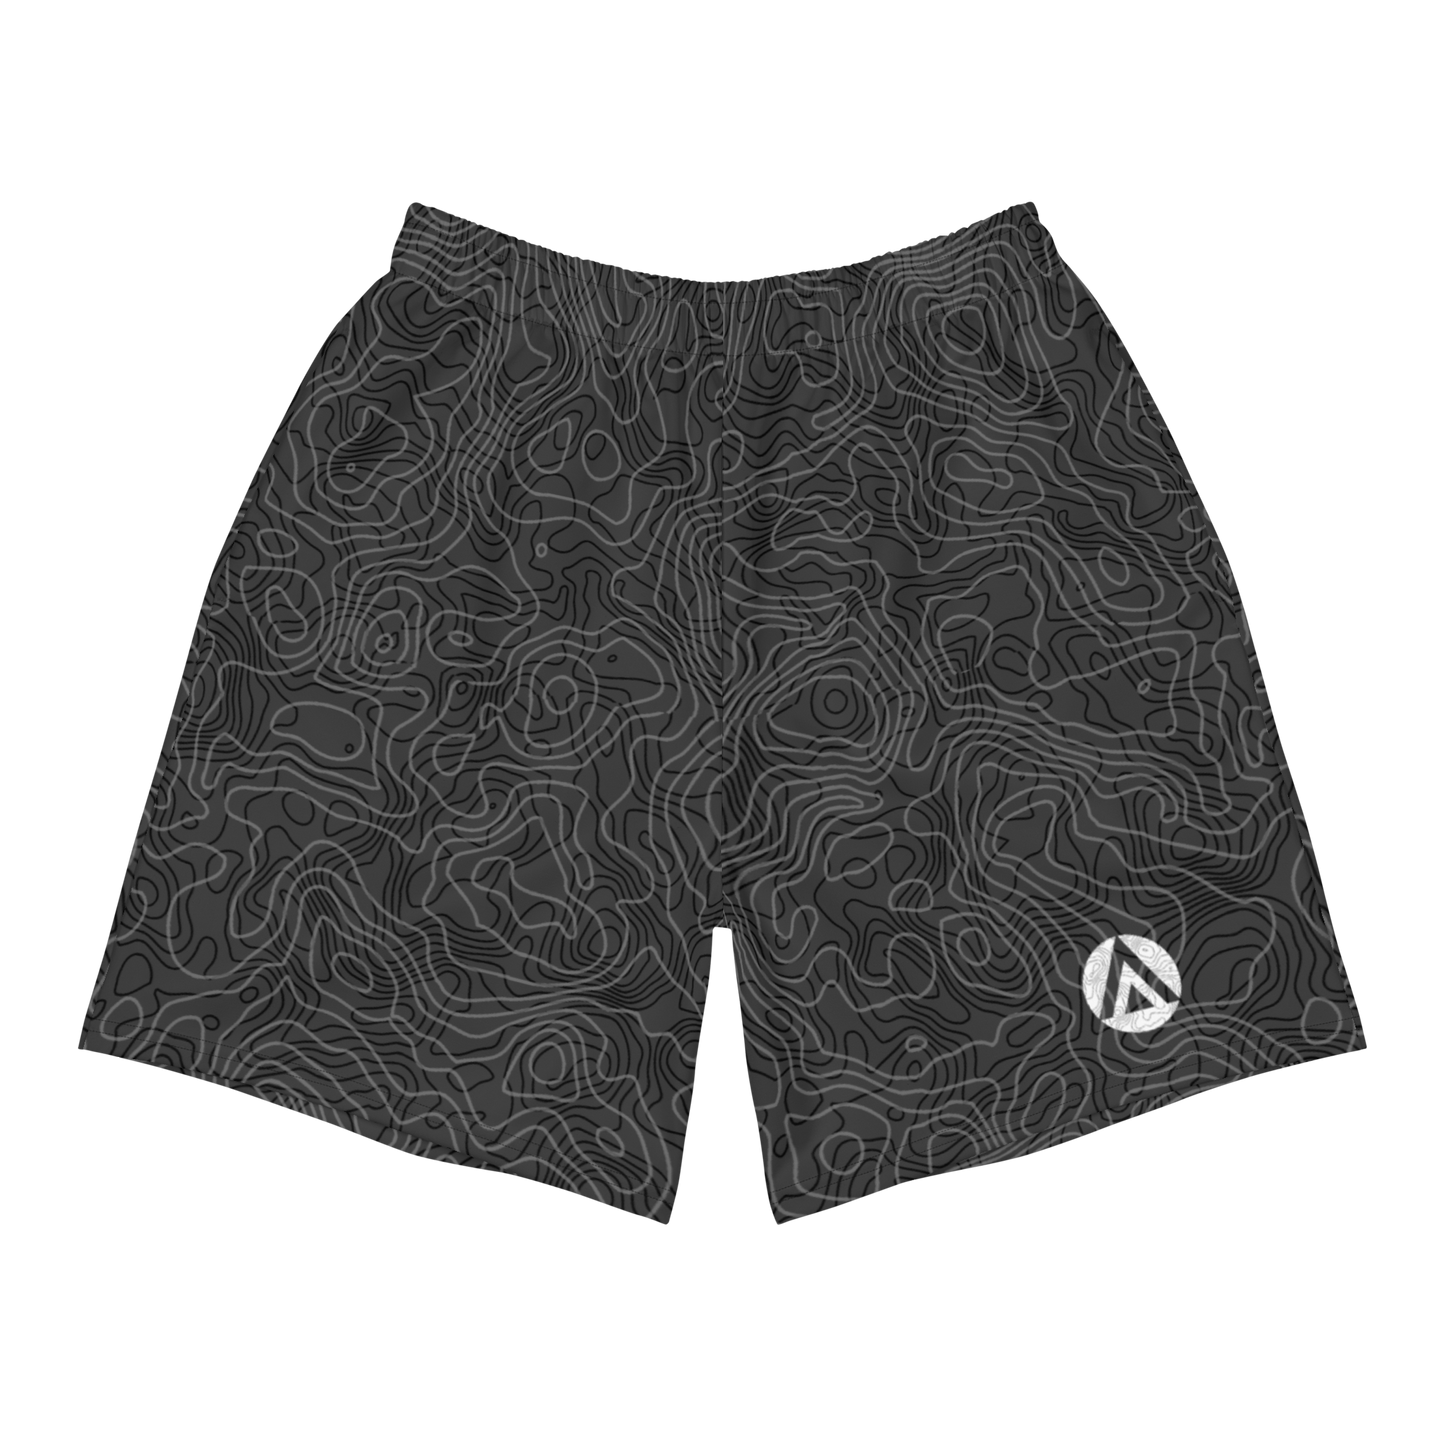 Men's Topography Athletic Shorts - Charcoal Gray